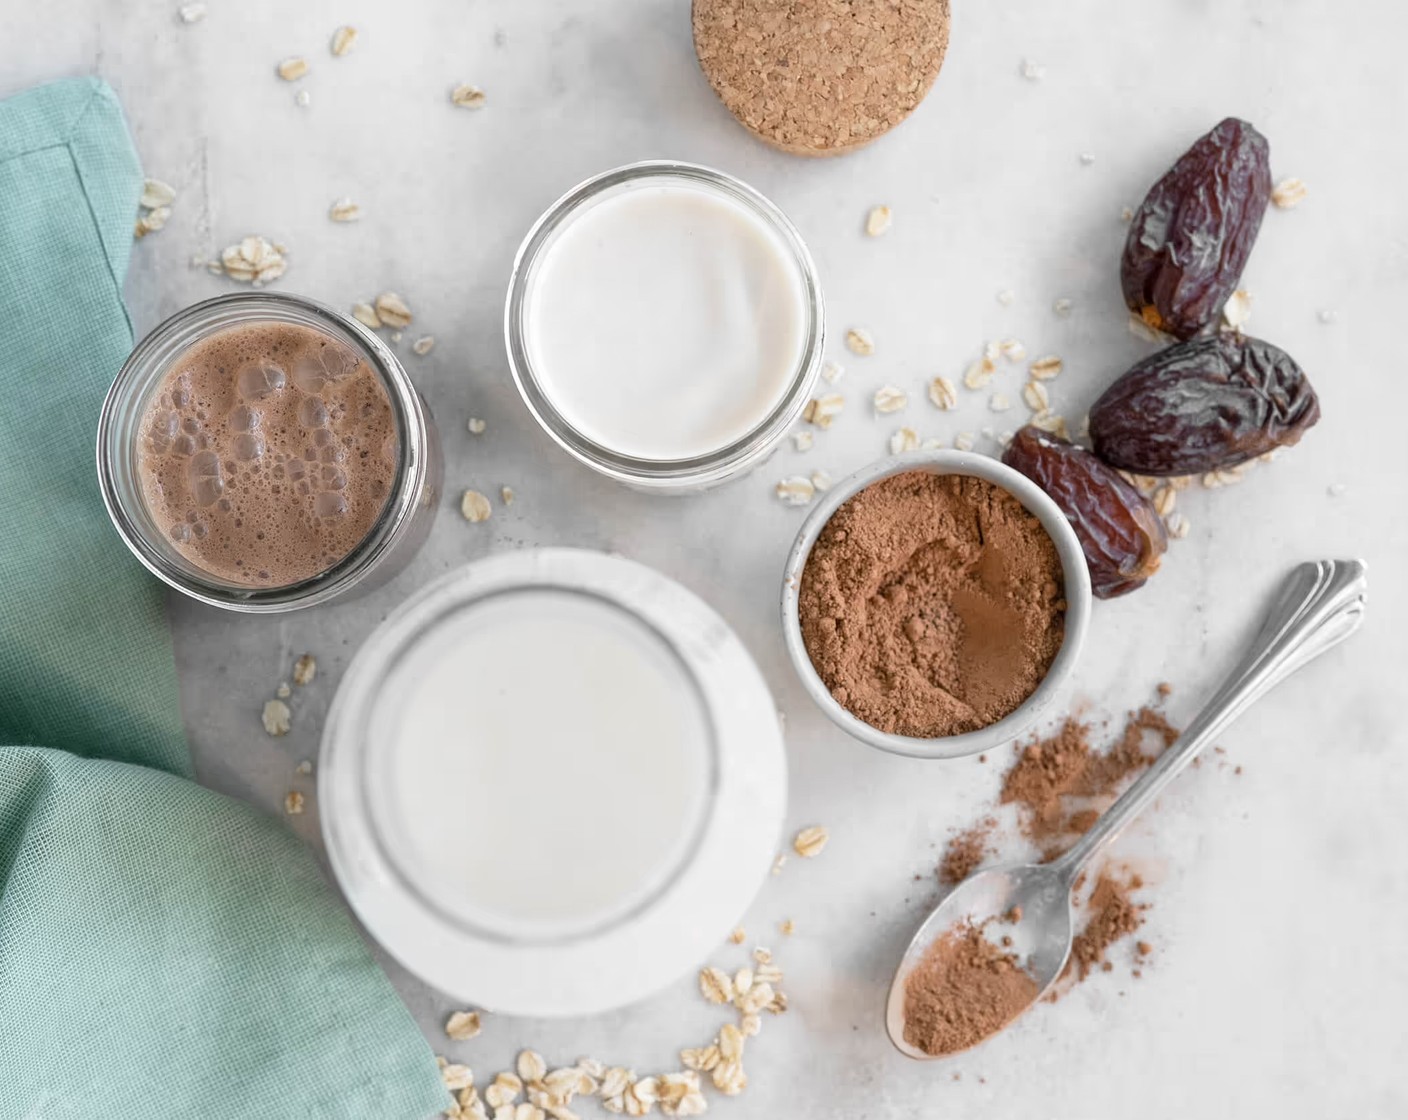 step 4 If you're making chocolate milk, add the Raw Cacao Powder (1/2 cup) after you've strained the oat pulp. Pop the oat milk back into the blender, add raw cacao powder and blend until combined and creamy.